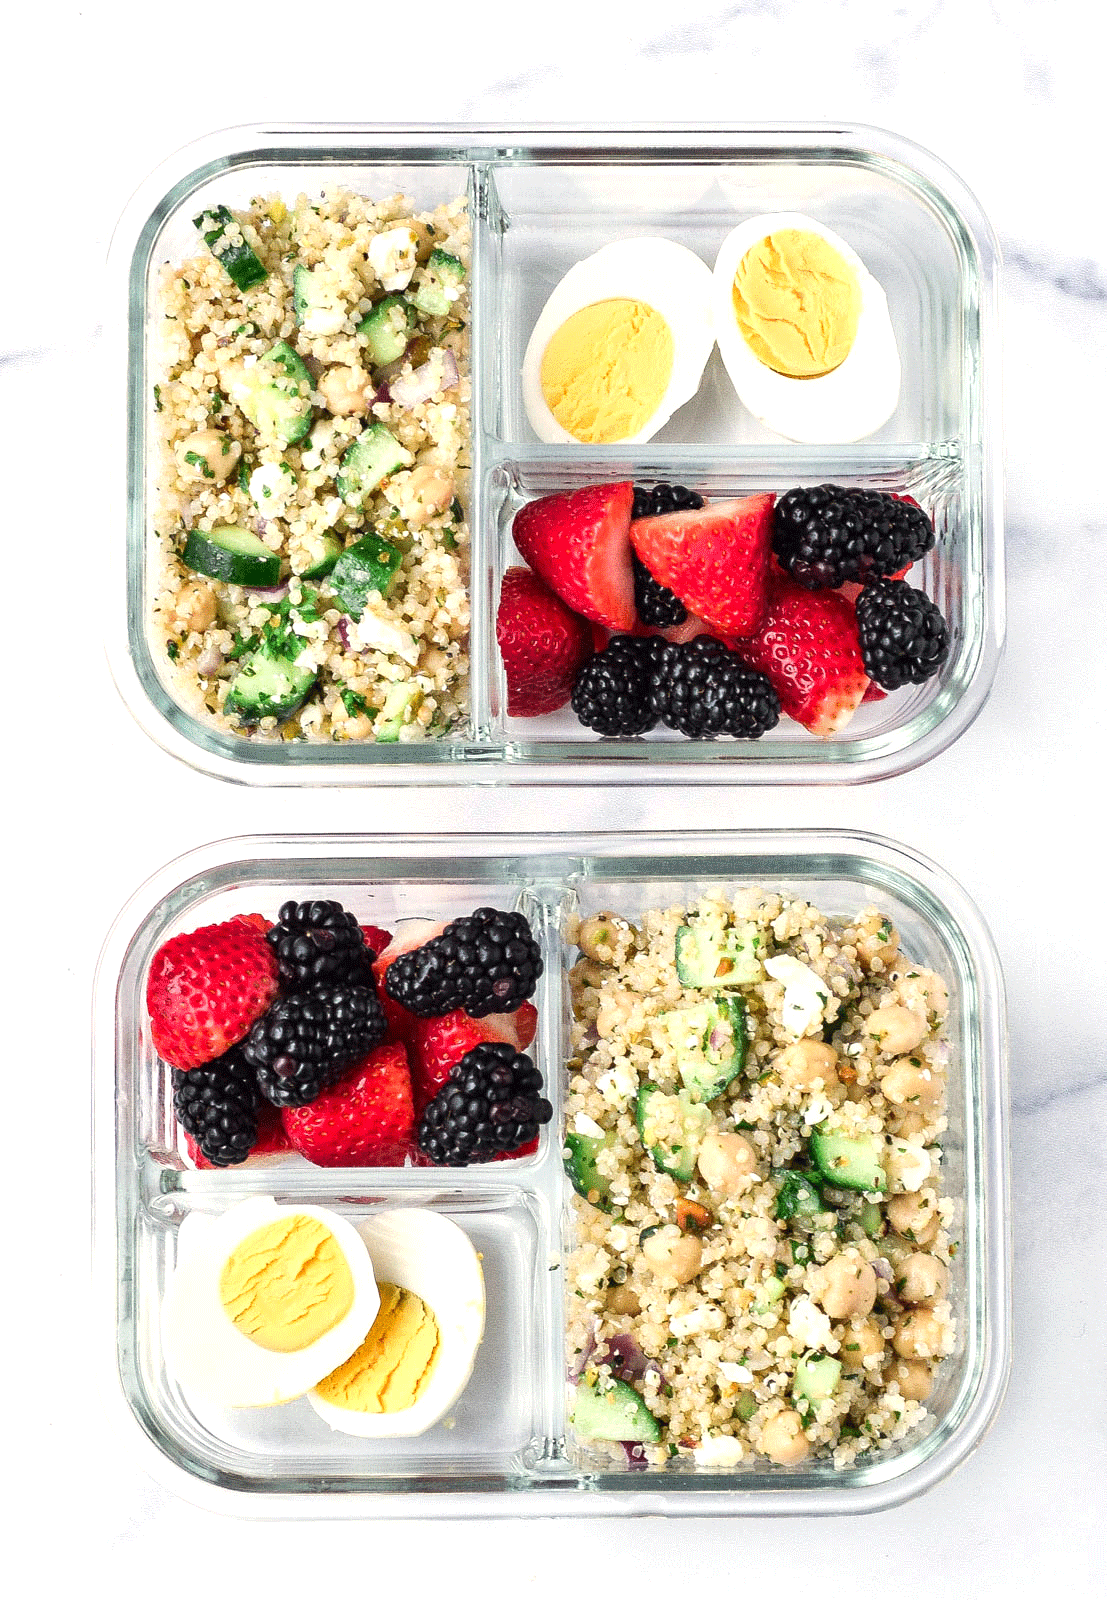 divided meal prep containers with jennifer aniston salad, hard boiled eggs, and berries